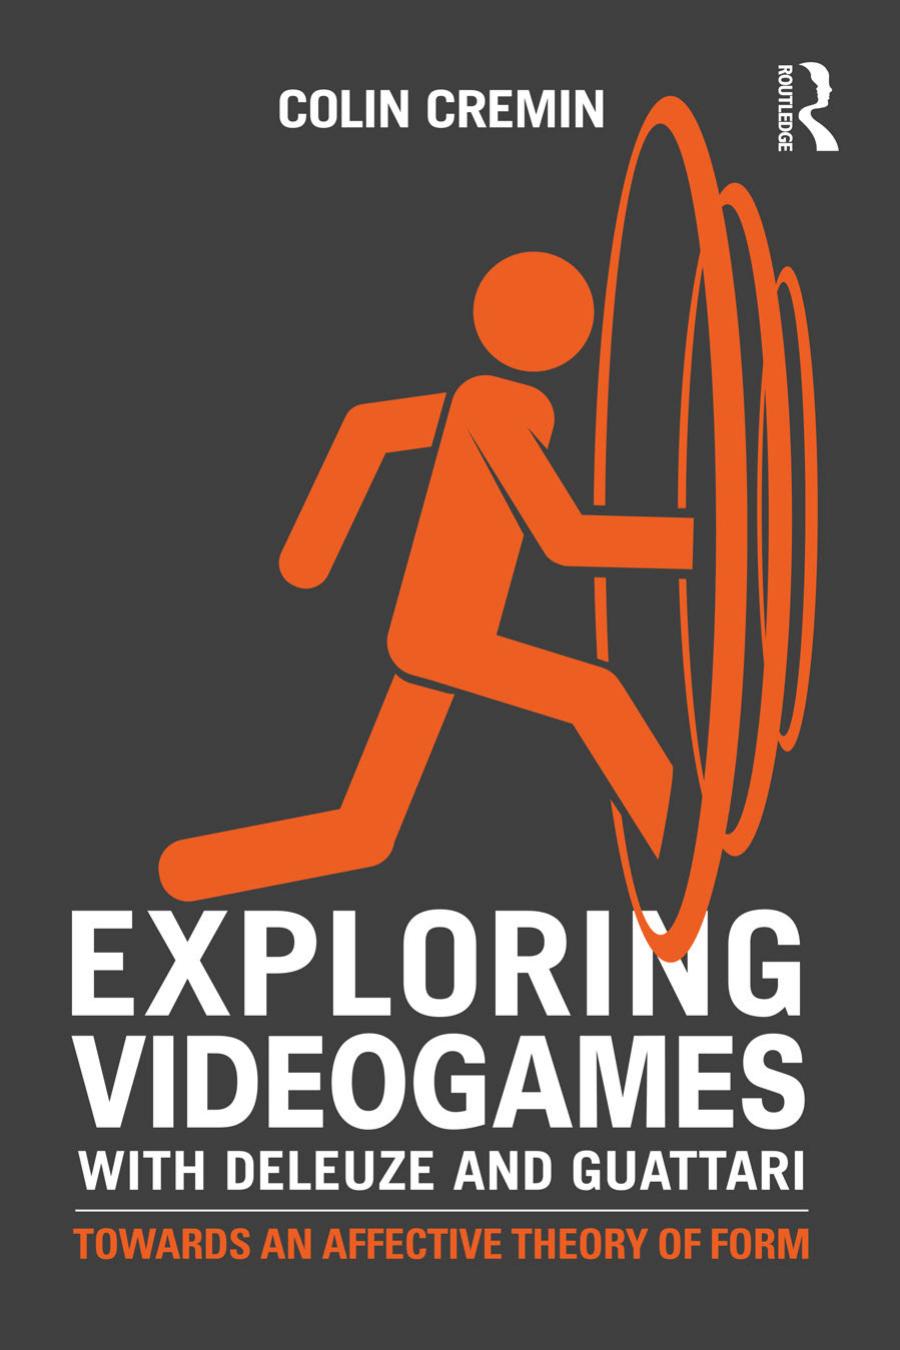 Colin Cremin: Exploring Videogames with Deleuze and Guattari (2015, Taylor & Francis Group)